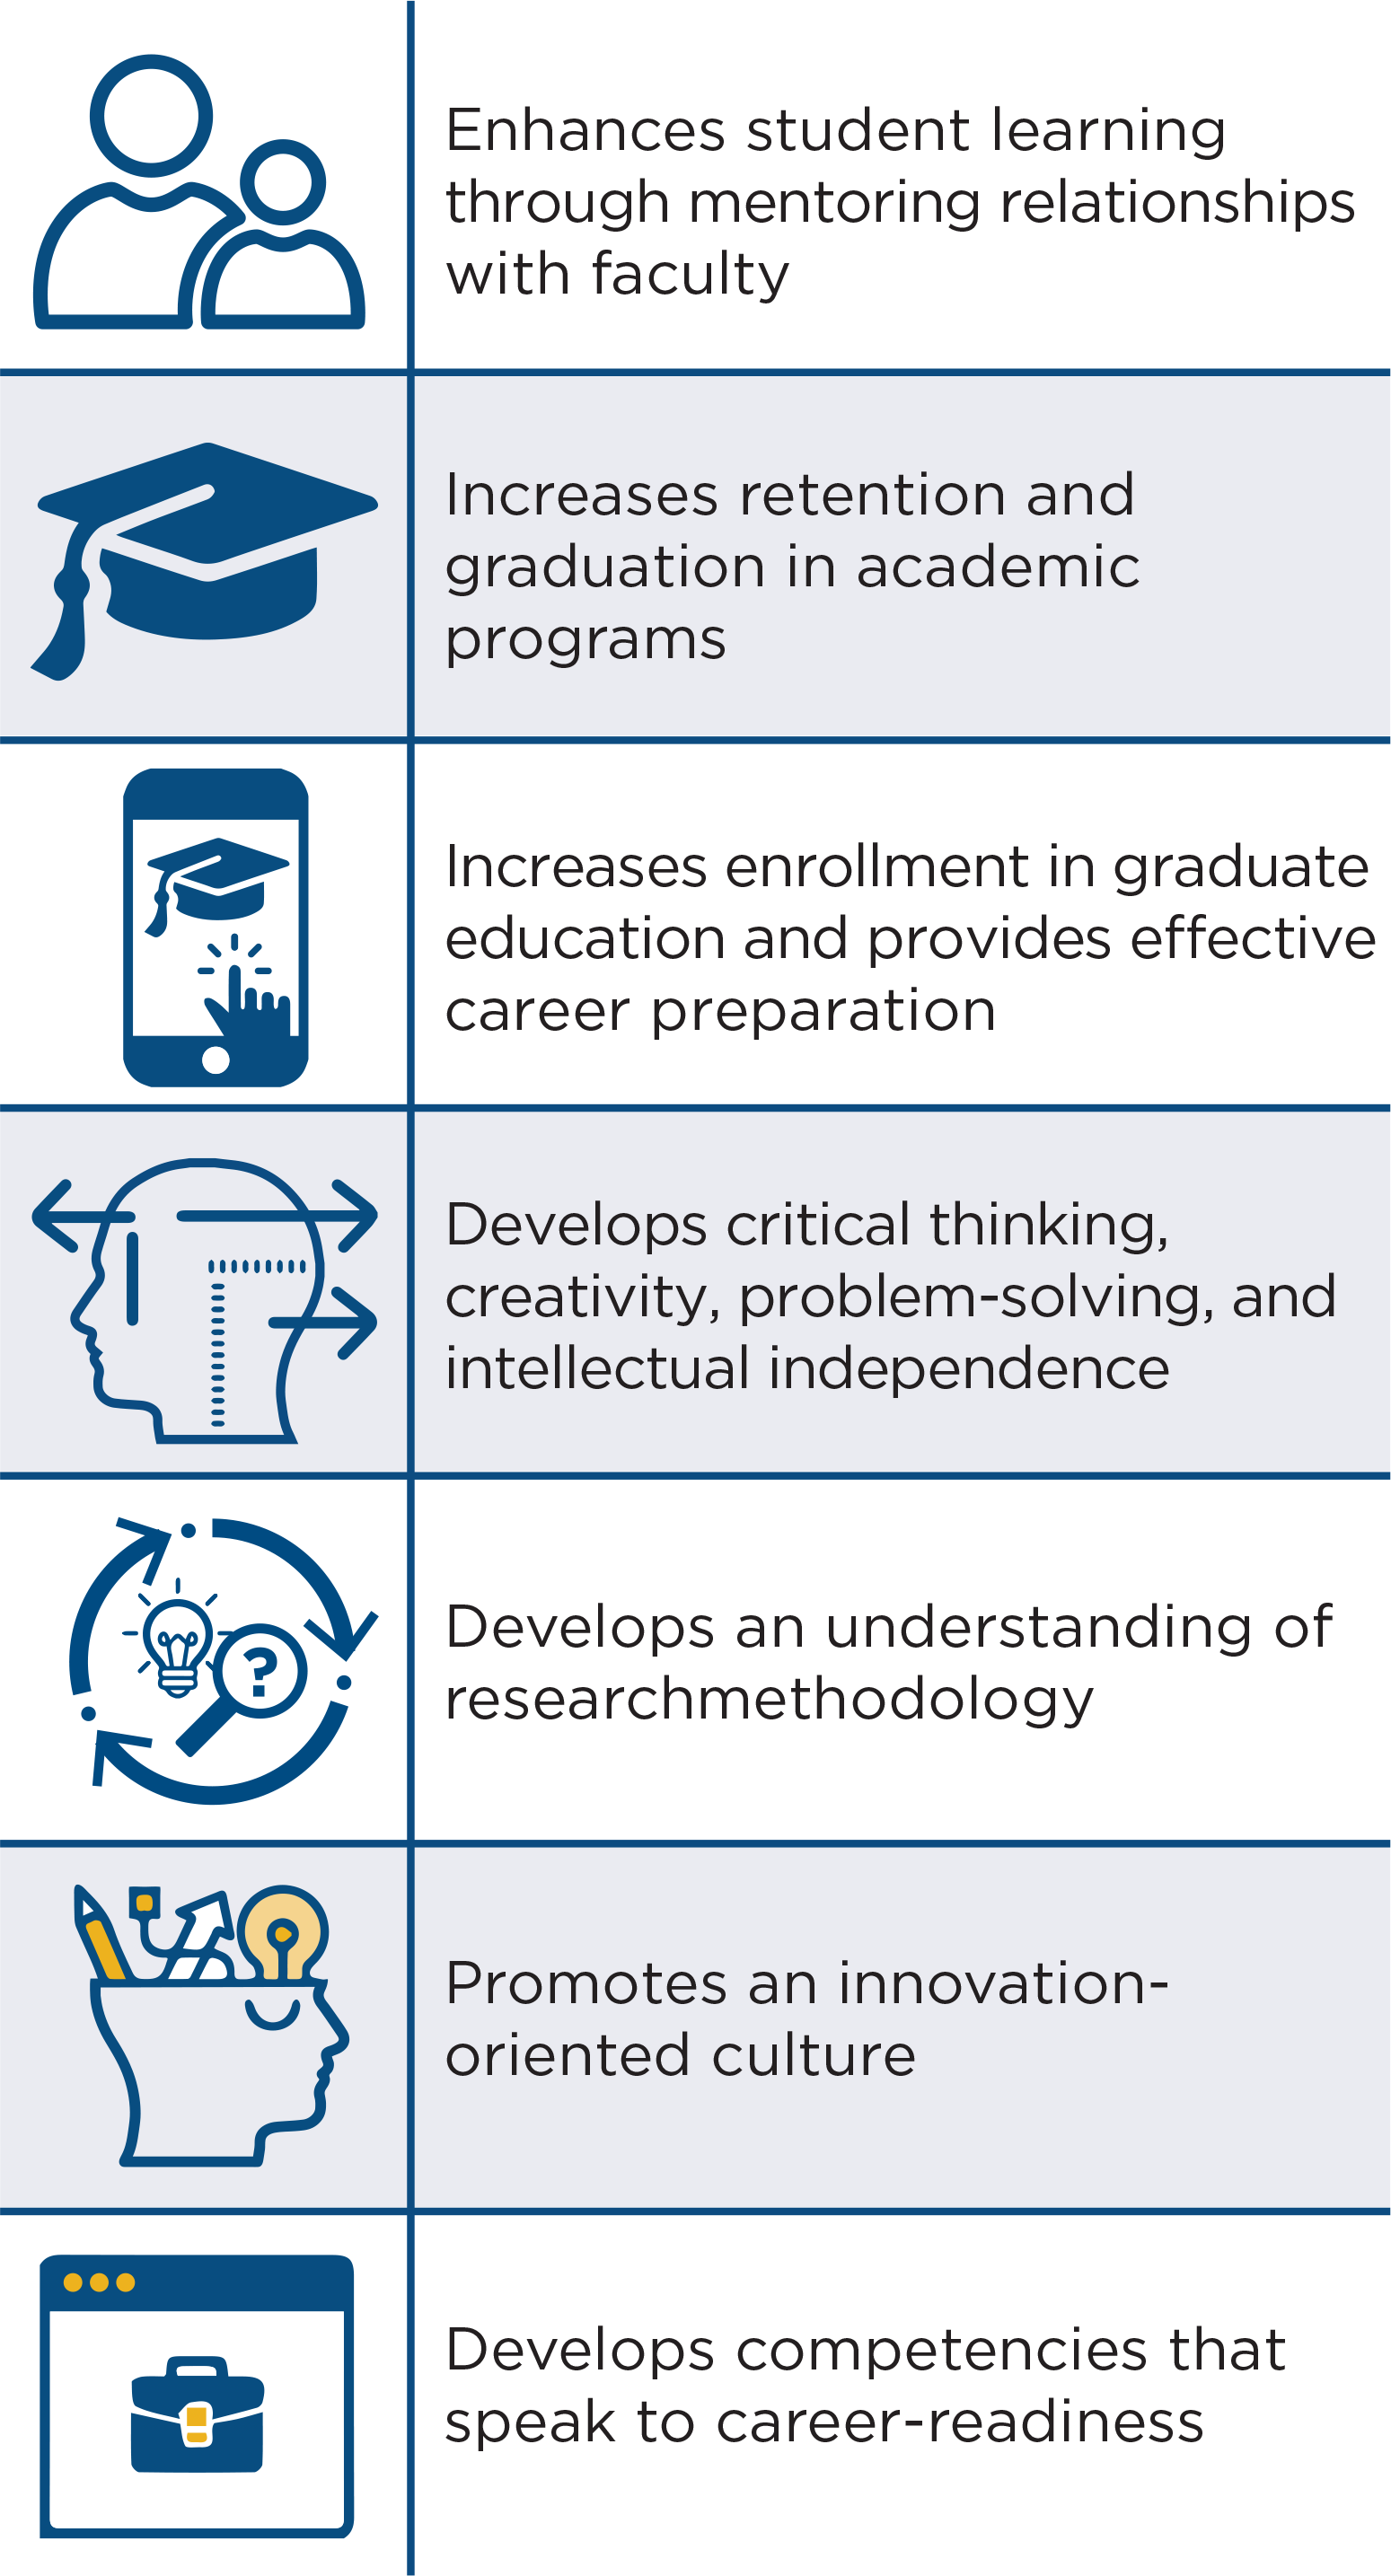 BENEFITS OF UR AS DEFINED BY CUR: Enhances student learning through mentoring relationships with faculty; Increases retention and graduation in academic programs; Increases enrollment in graduate education and provides effective career preparation; Develops critical thinking, creativity, problem solving, and intellectual independence; Develops an understanding of research methodology; Promotes an innovation-oriented culture; Develops competencies that speak to career-readiness. www.cur.org/